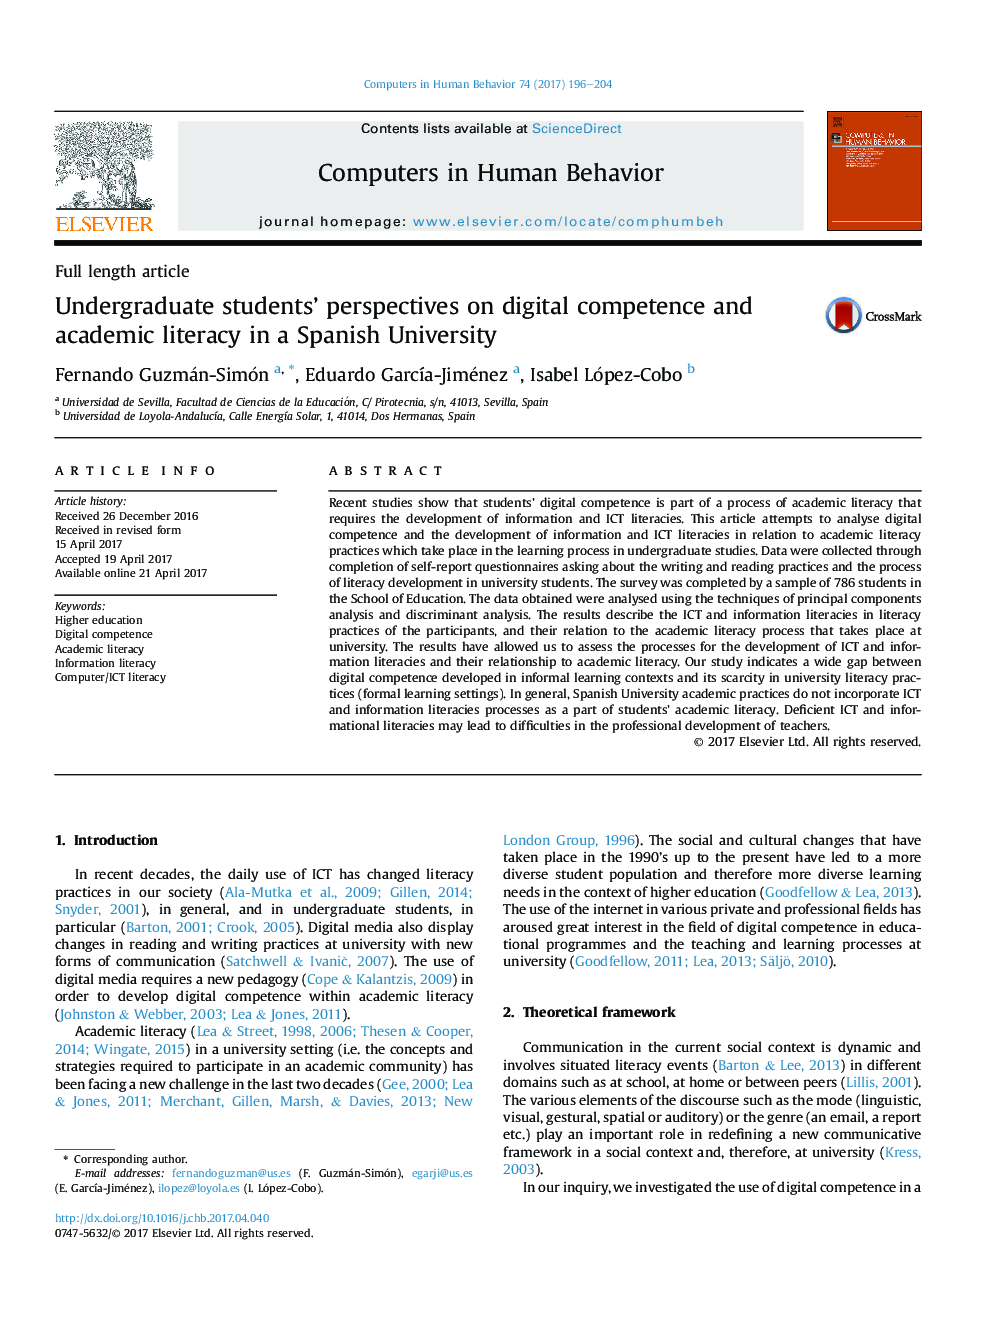 Undergraduate students' perspectives on digital competence and academic literacy in a Spanish University